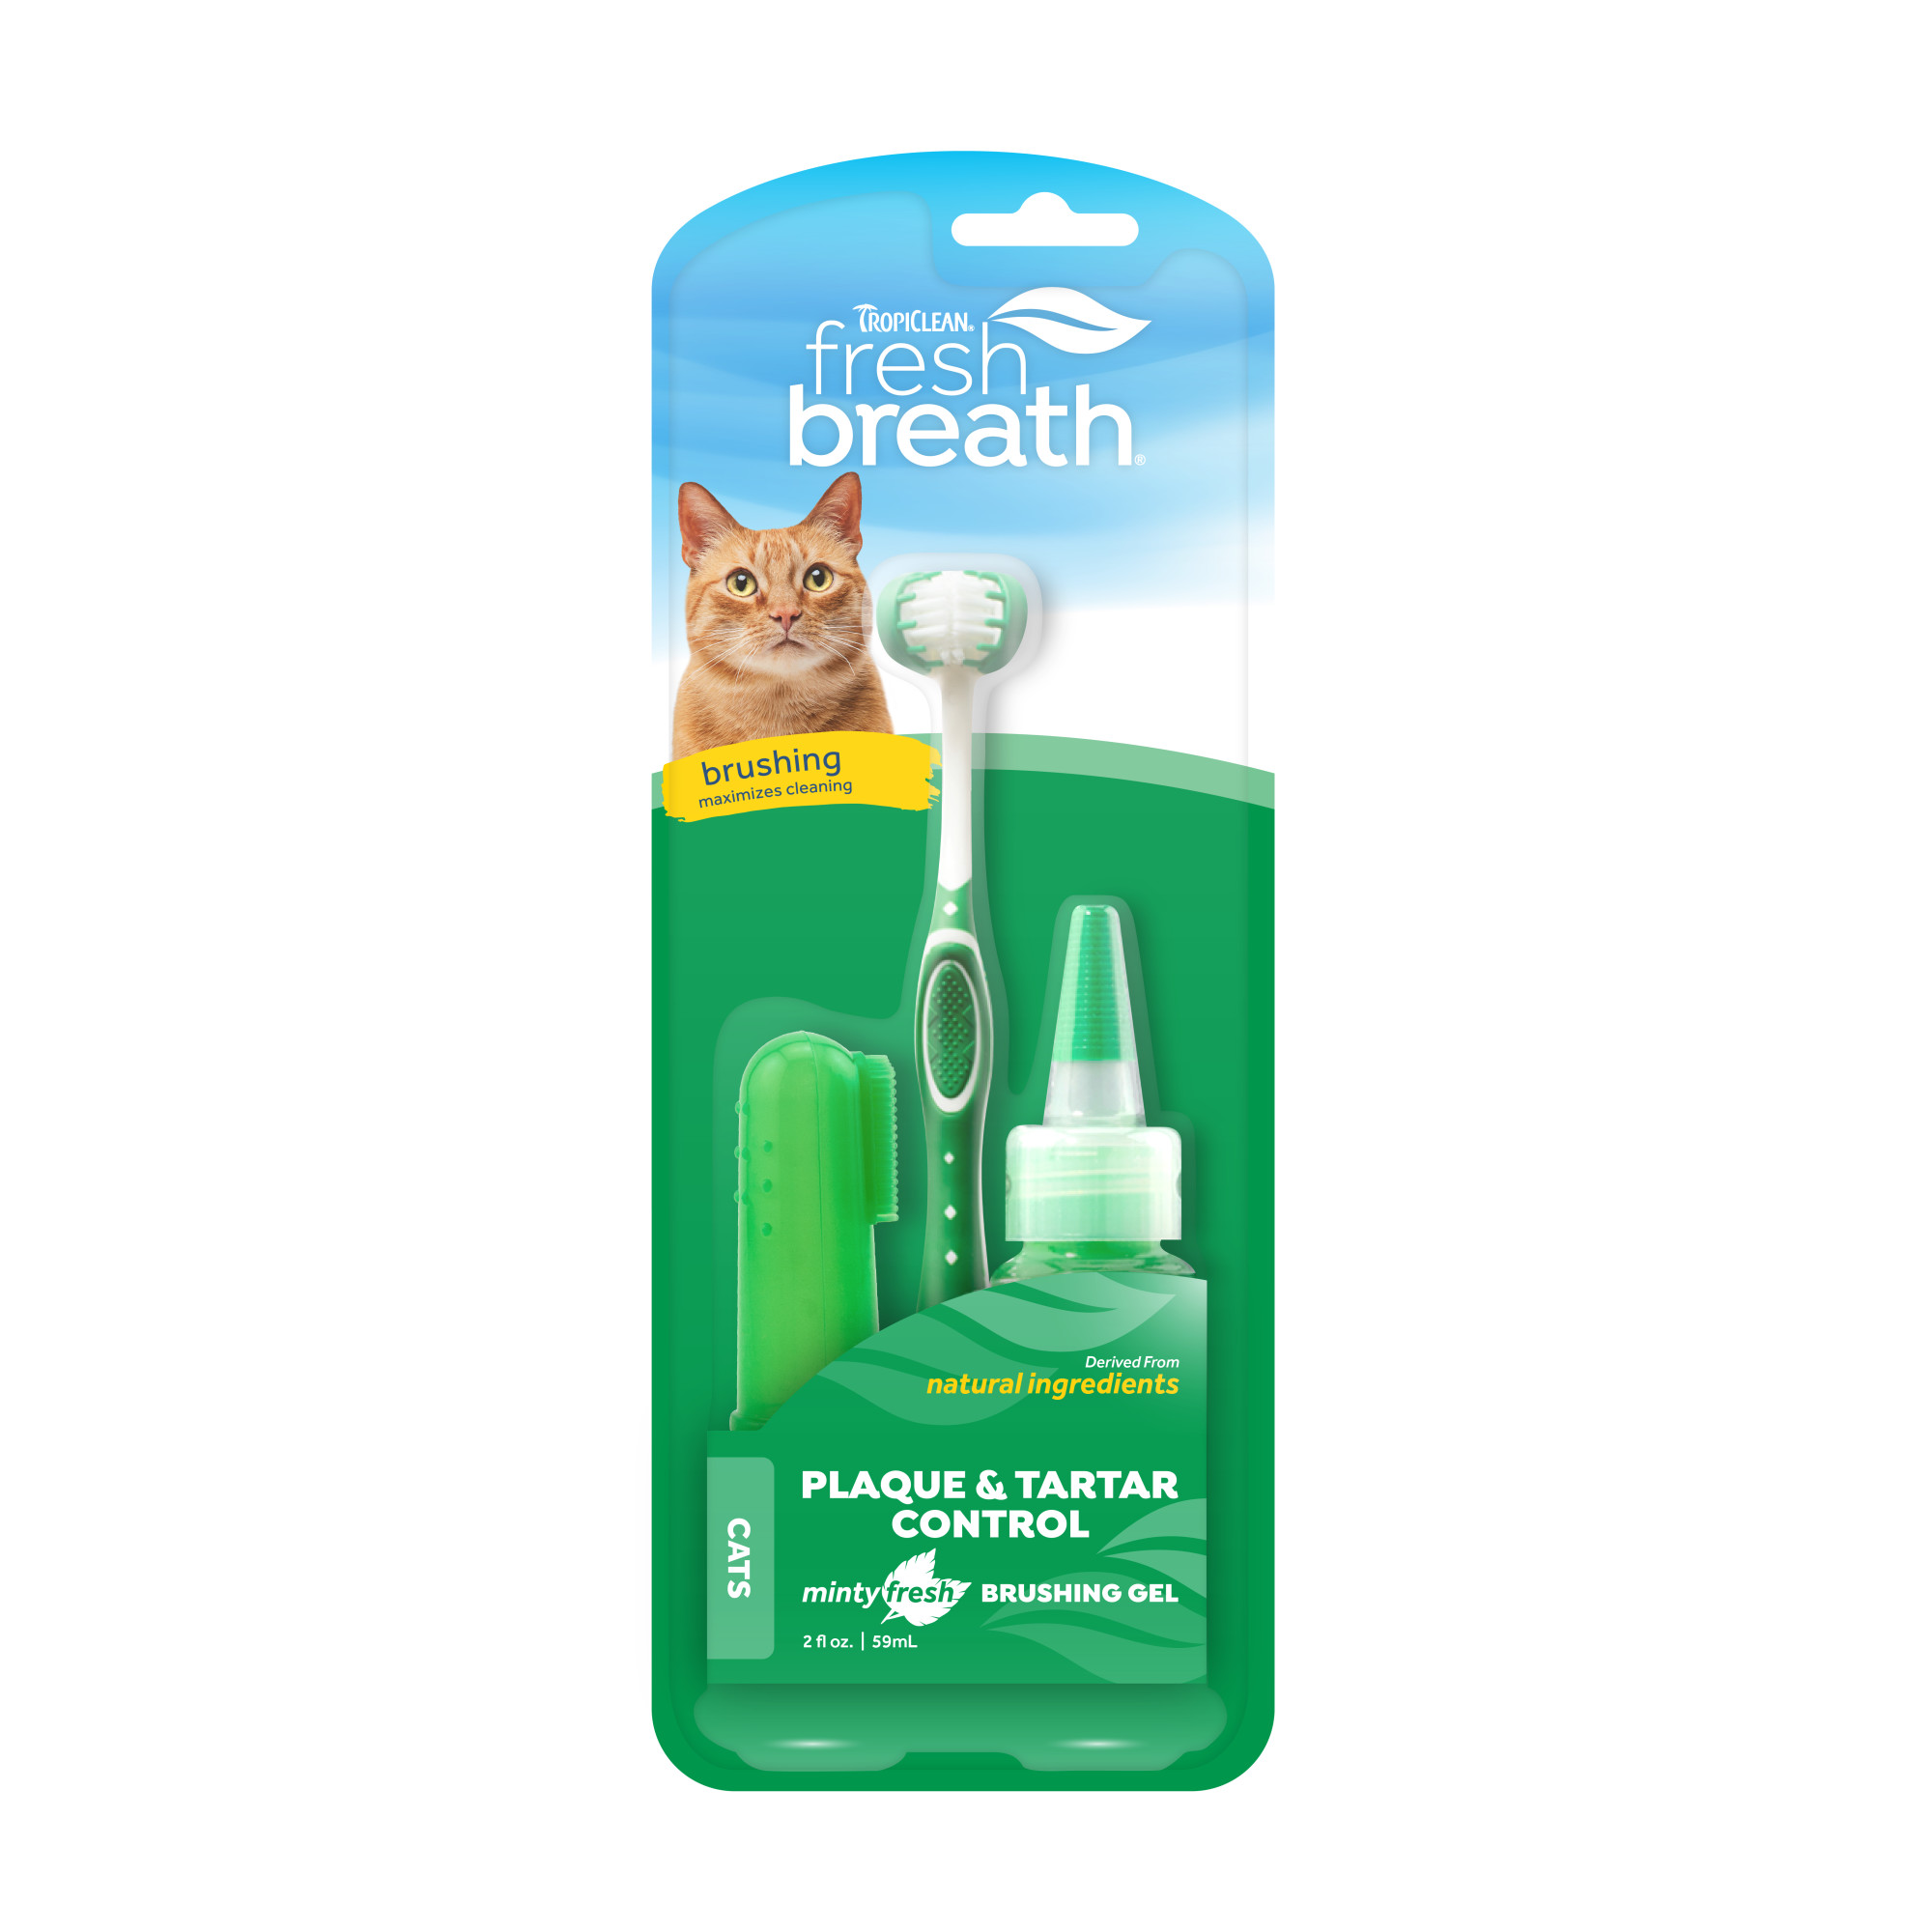 Oral Care Kit for Cats